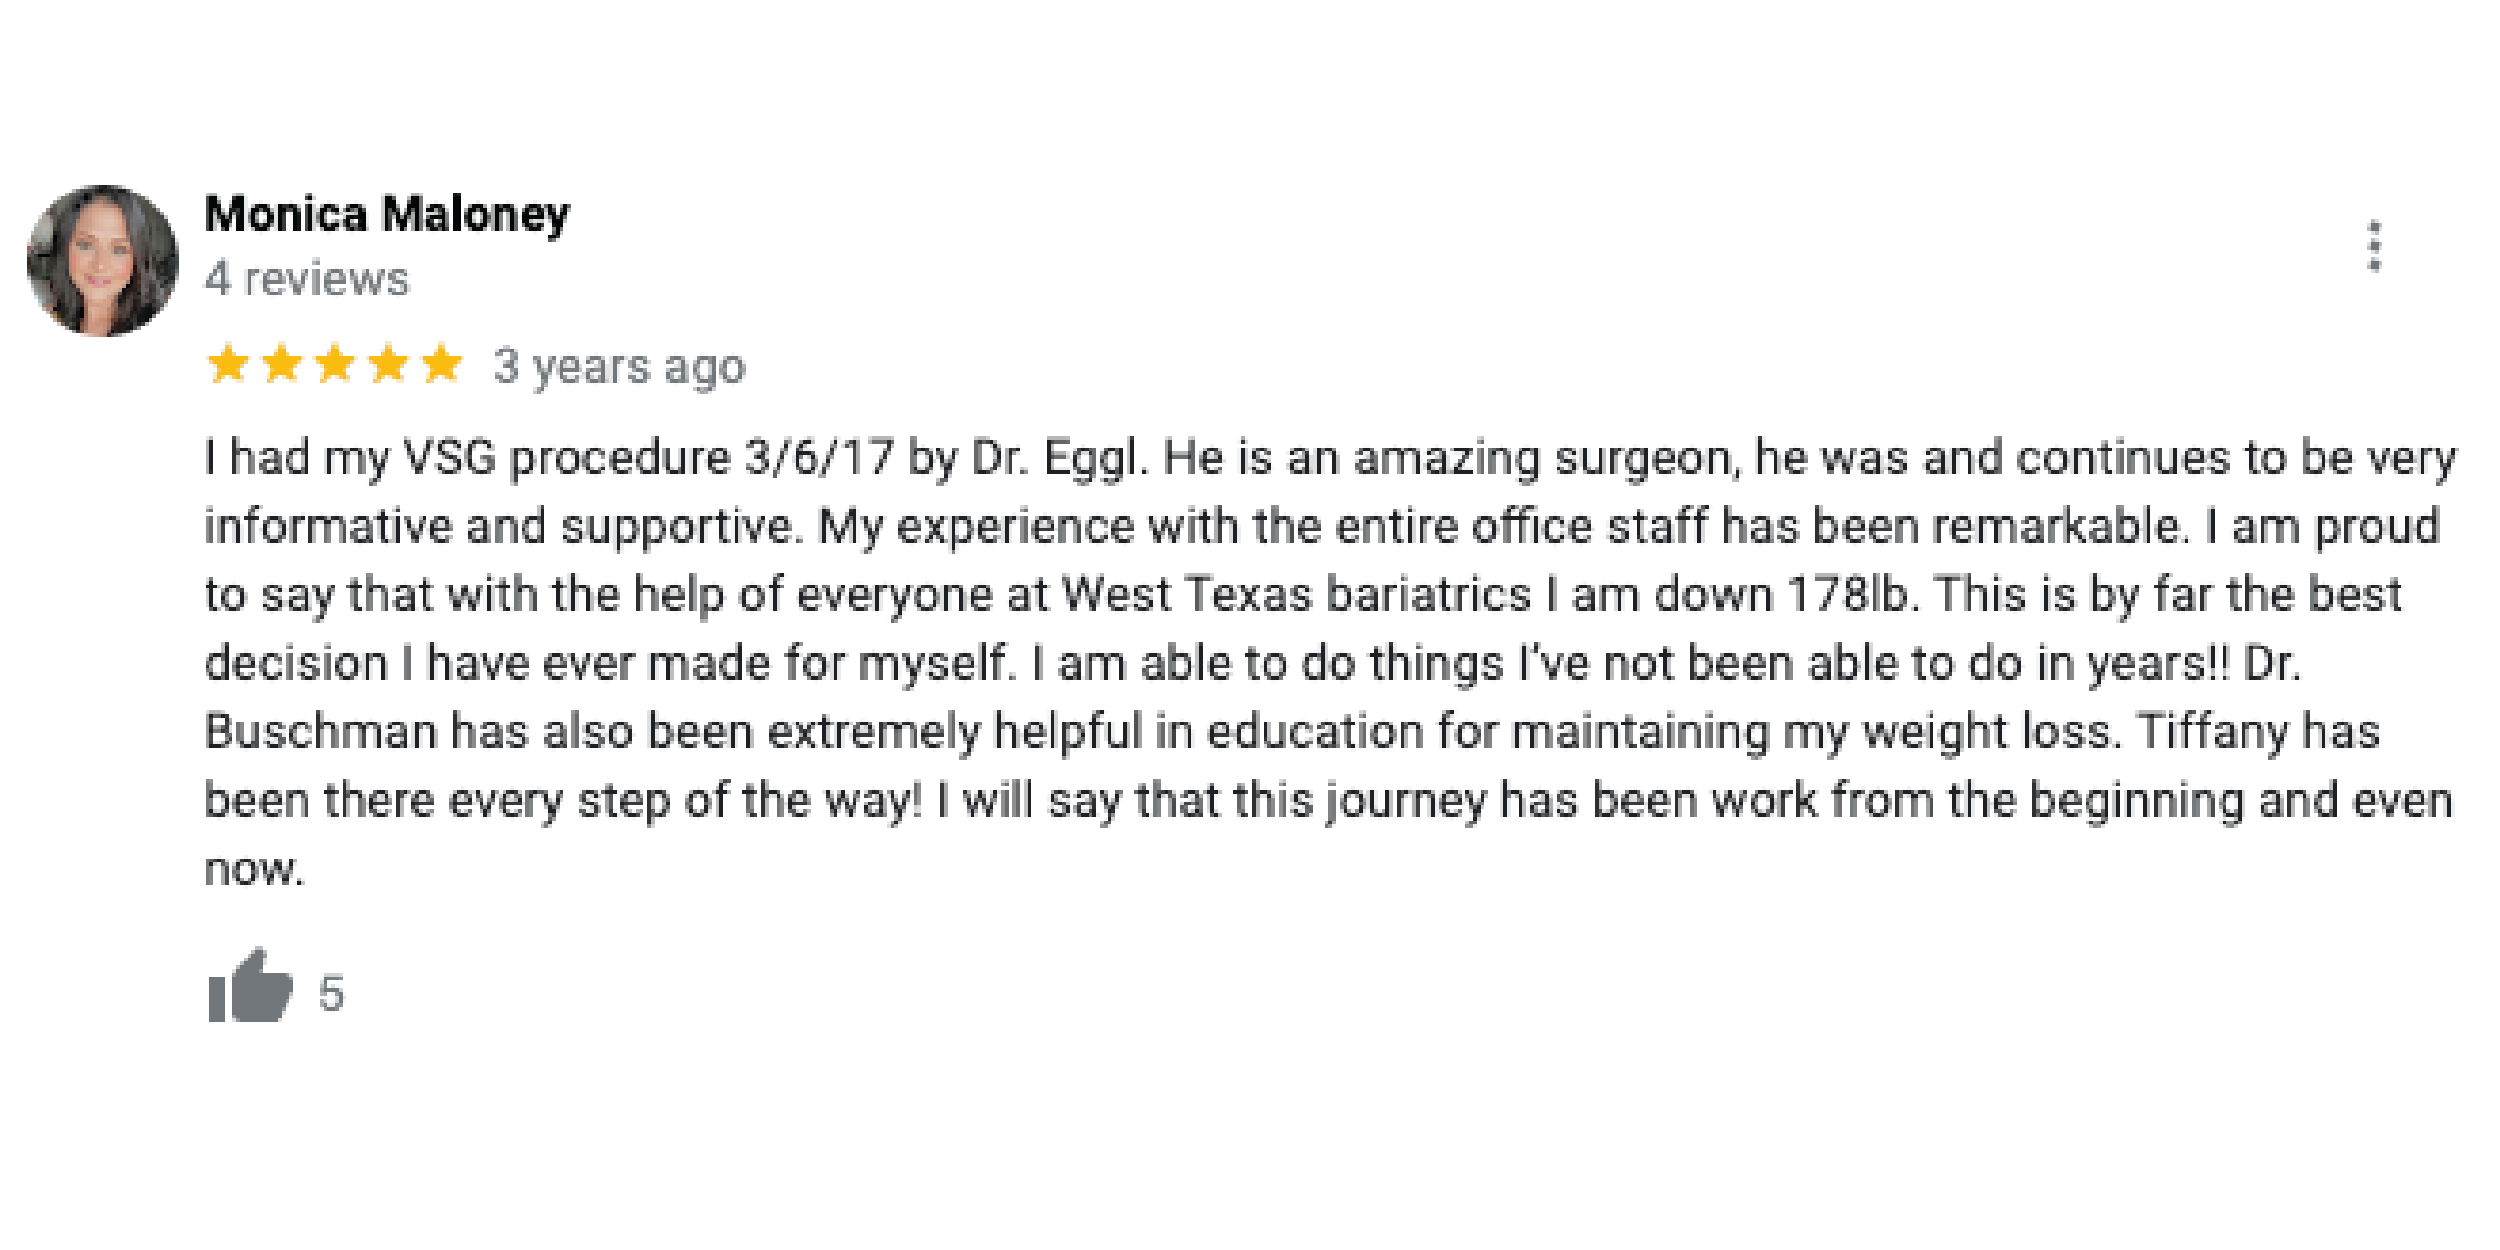 Patients' review of their VSG procedure at West Texas Bariatrics